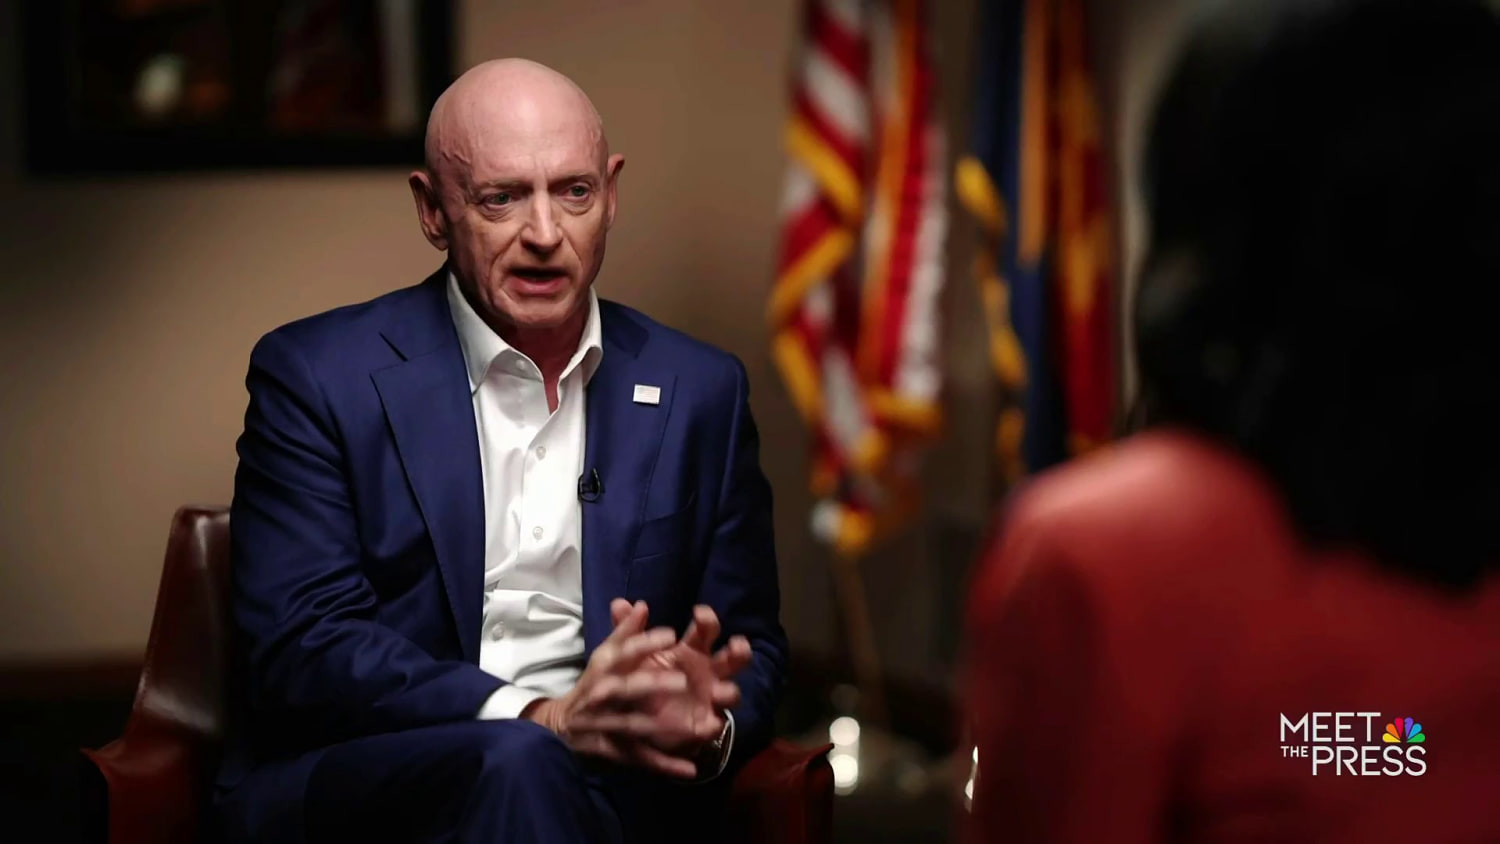 Arizona Sen. Kelly says immigration is the ‘most frustrating’ issue of his ‘adult life’